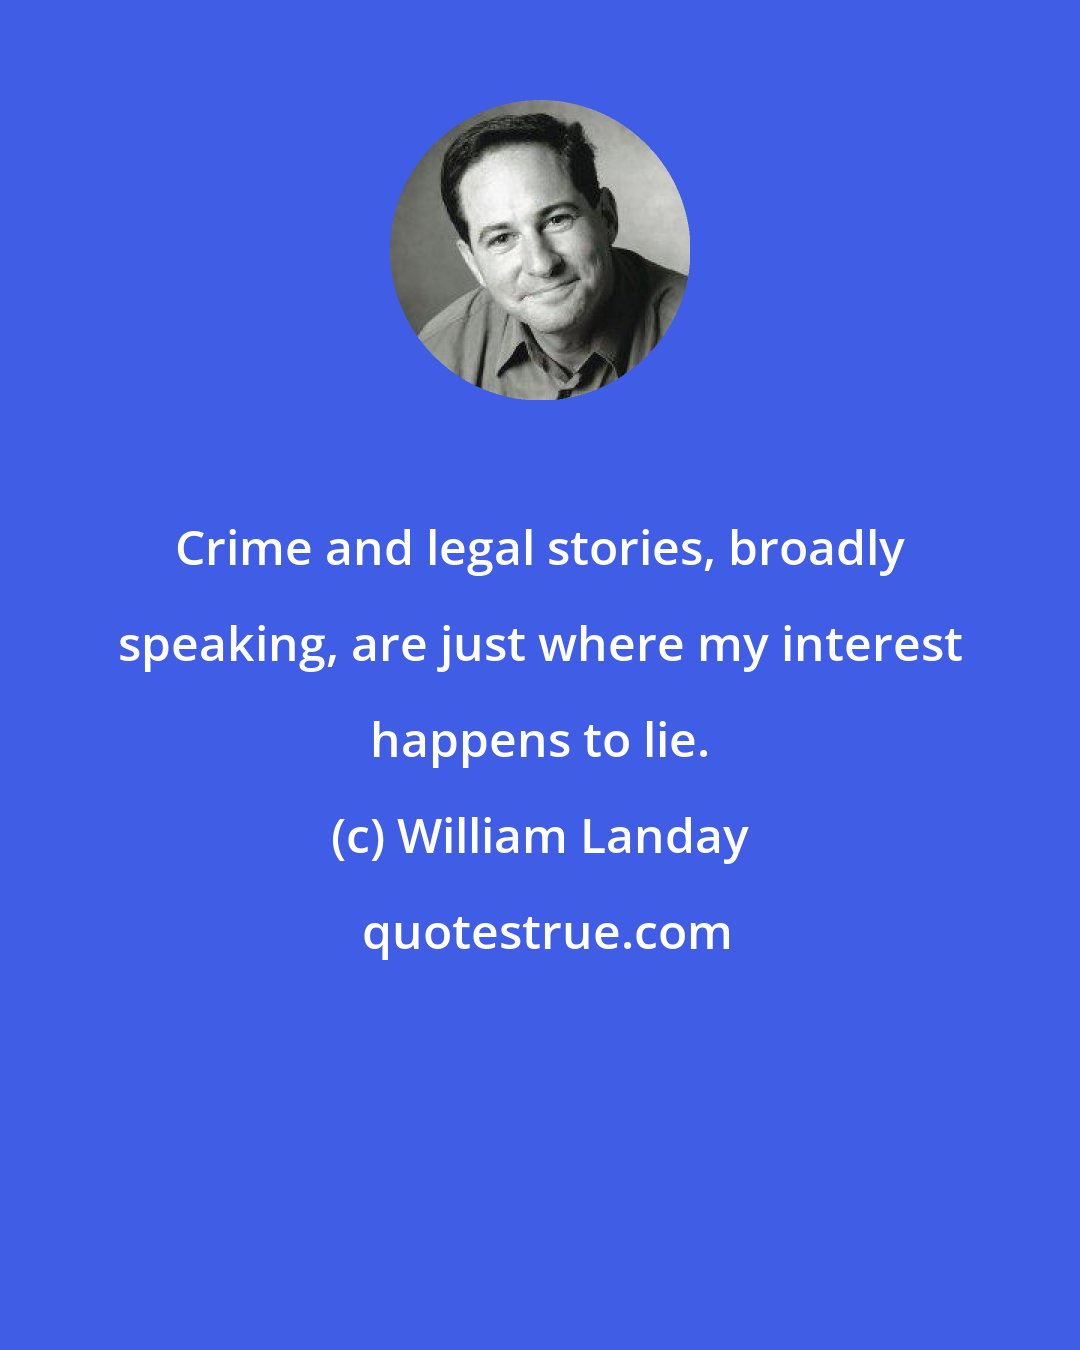 William Landay: Crime and legal stories, broadly speaking, are just where my interest happens to lie.